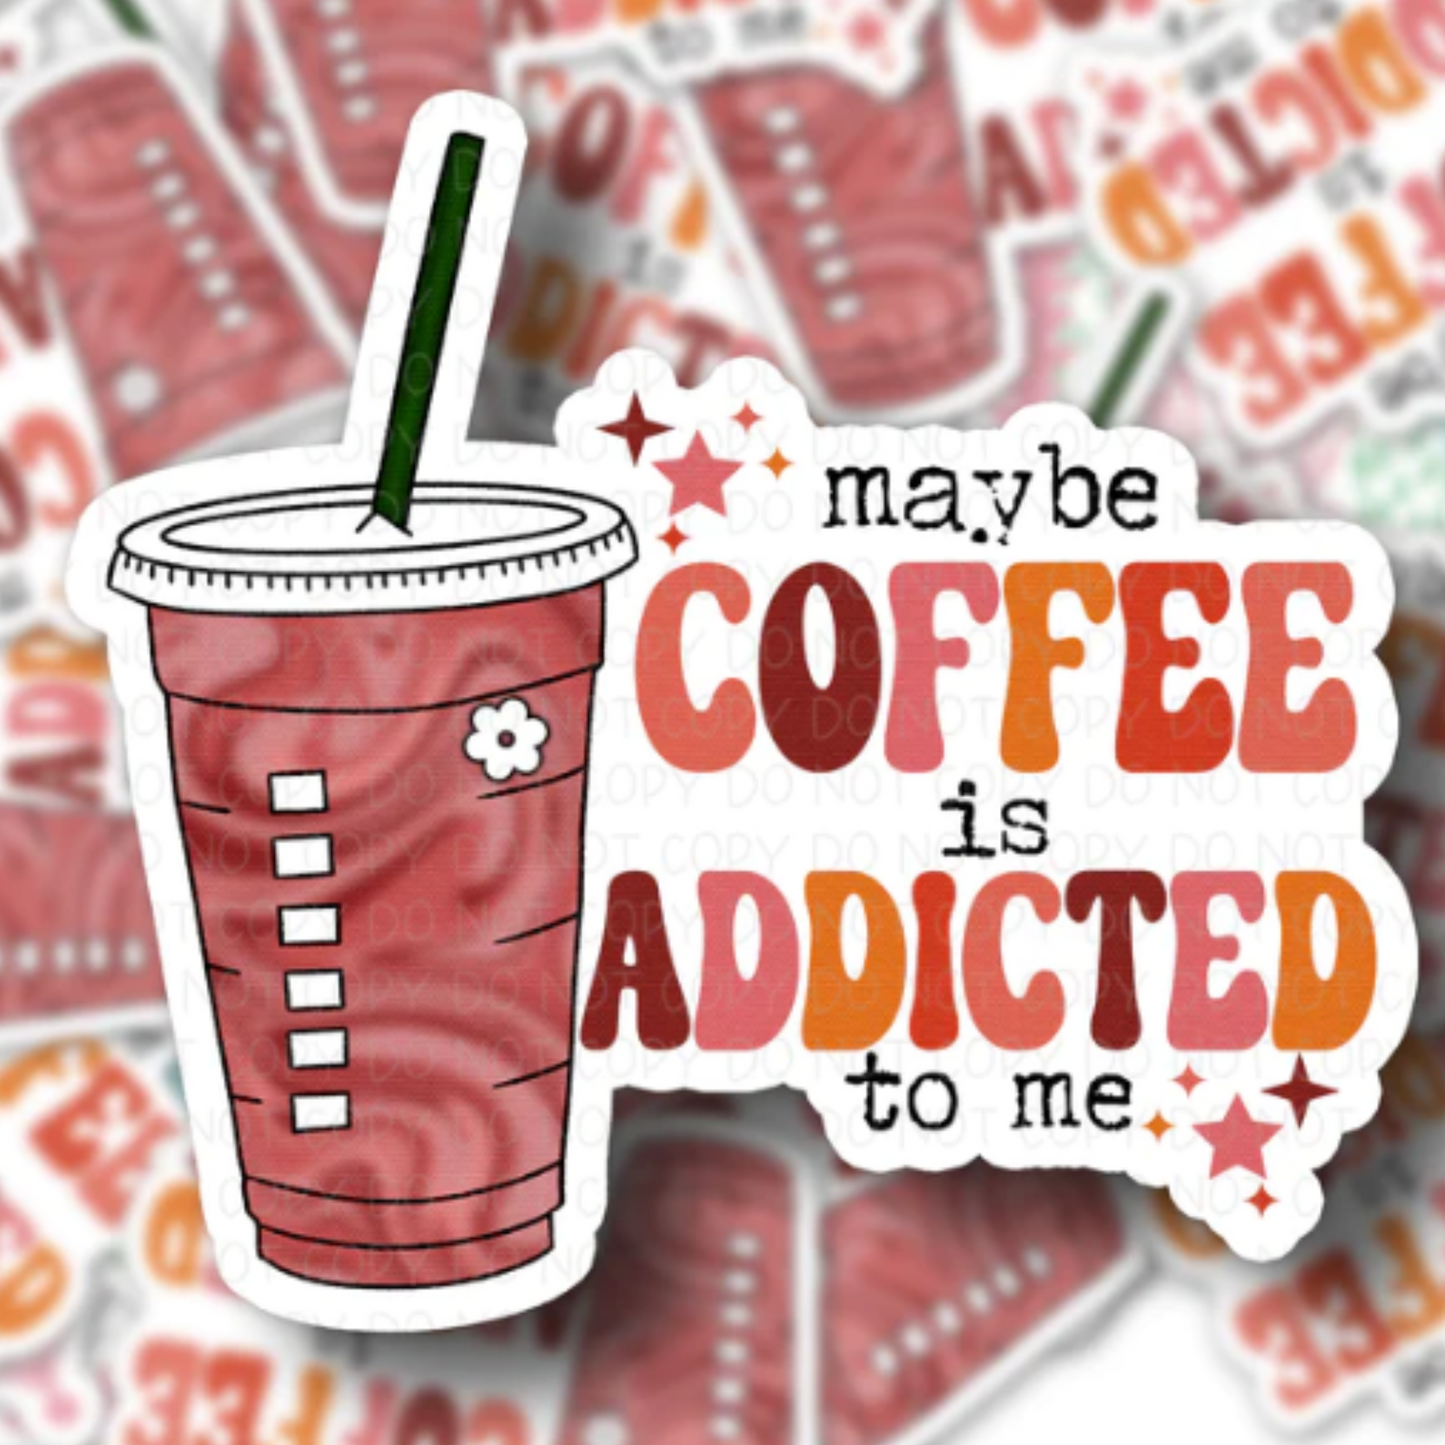 2" Vinyl Sticker - Maybe coffee is addicted to me - Pitty Intense Vinyl